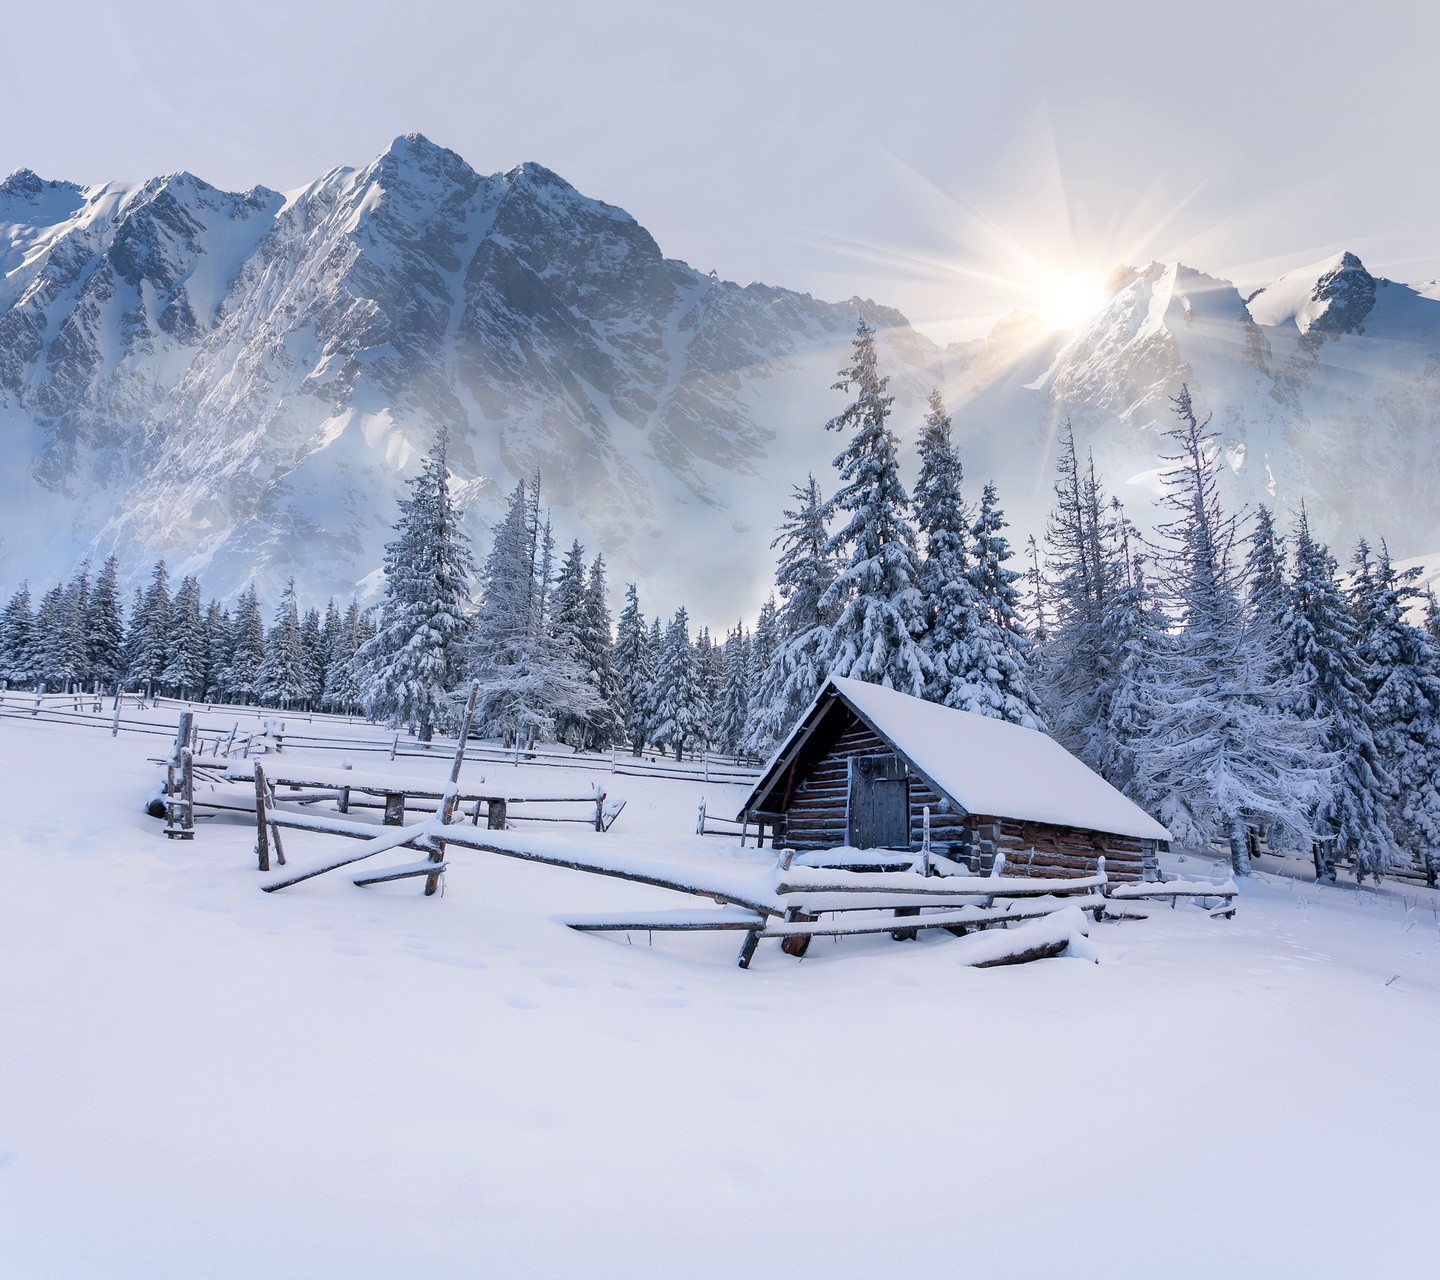 General 1440x1280 cabin landscape mountains winter snow cold outdoors nature hut snowy peak snowy mountain trees